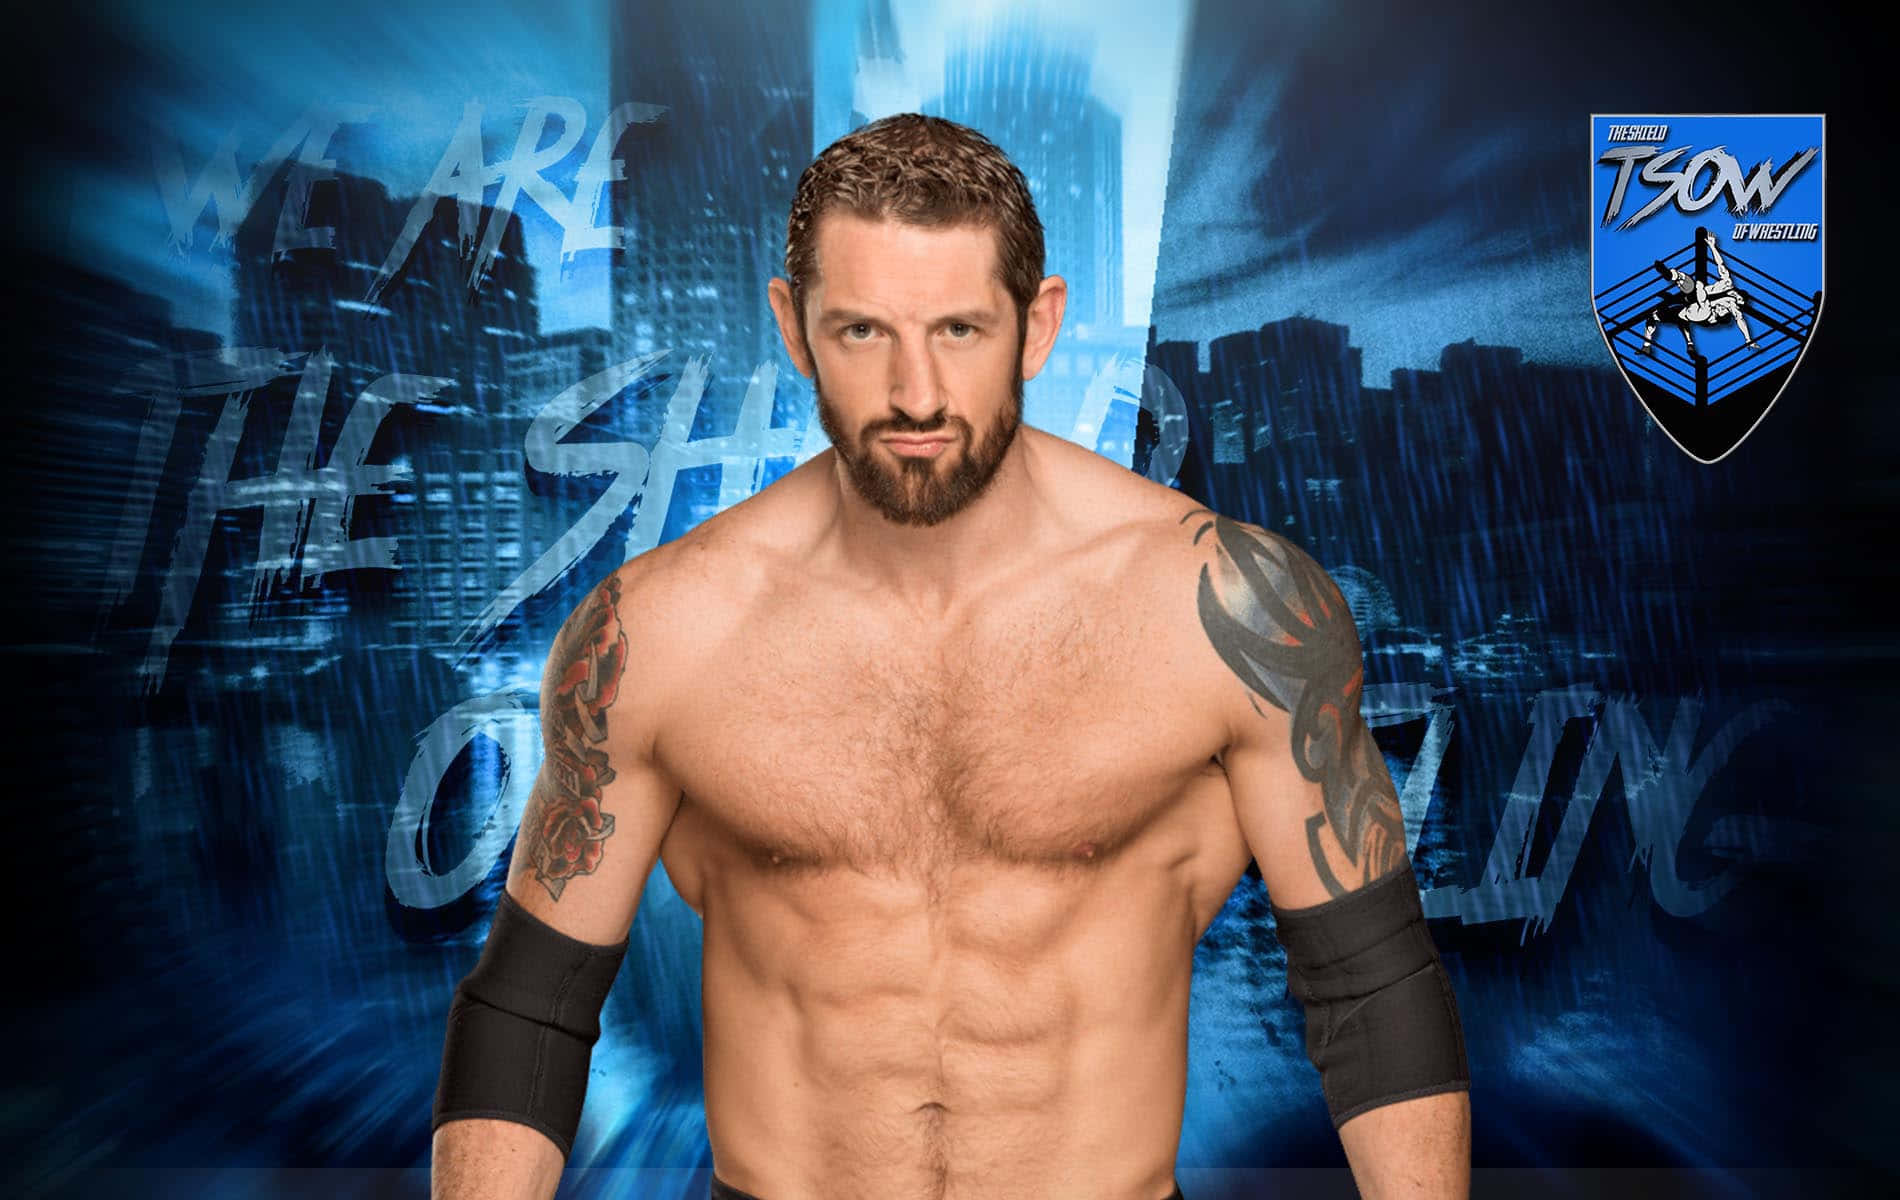 Exclusive interview: Bad News Barrett on how he got so ripped | WWE